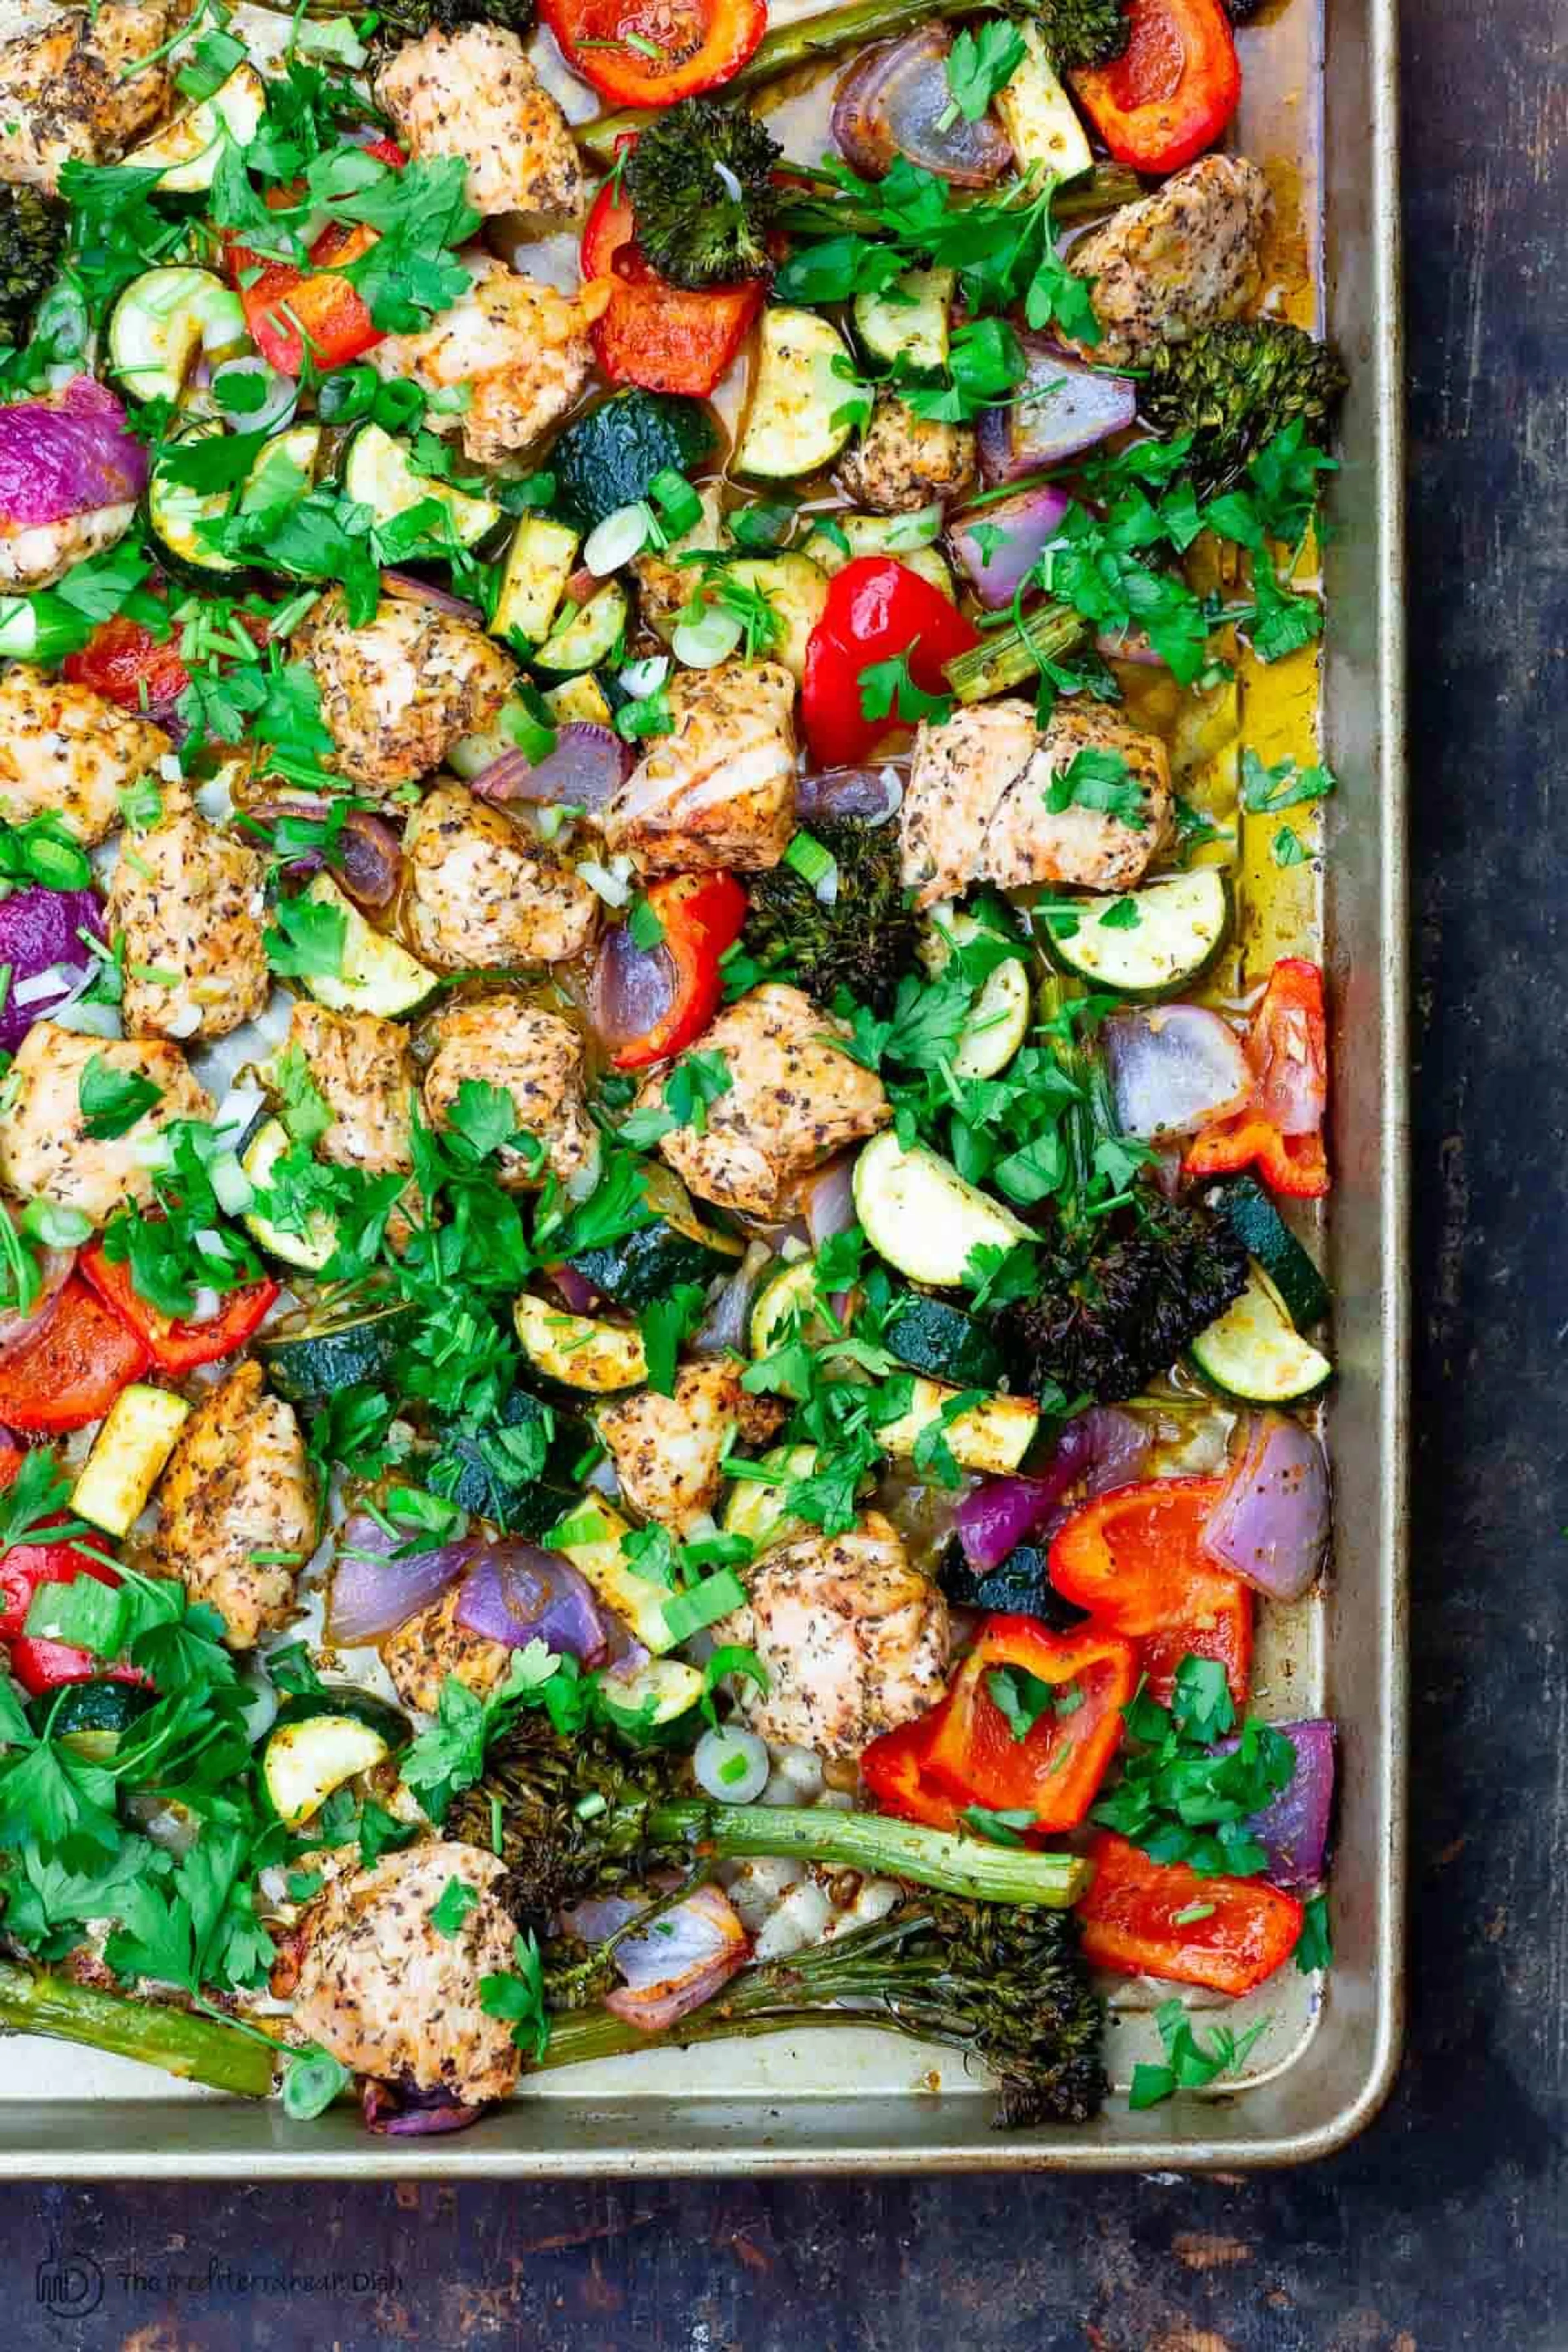 Italian-Style Sheet Pan Chicken with Vegetables